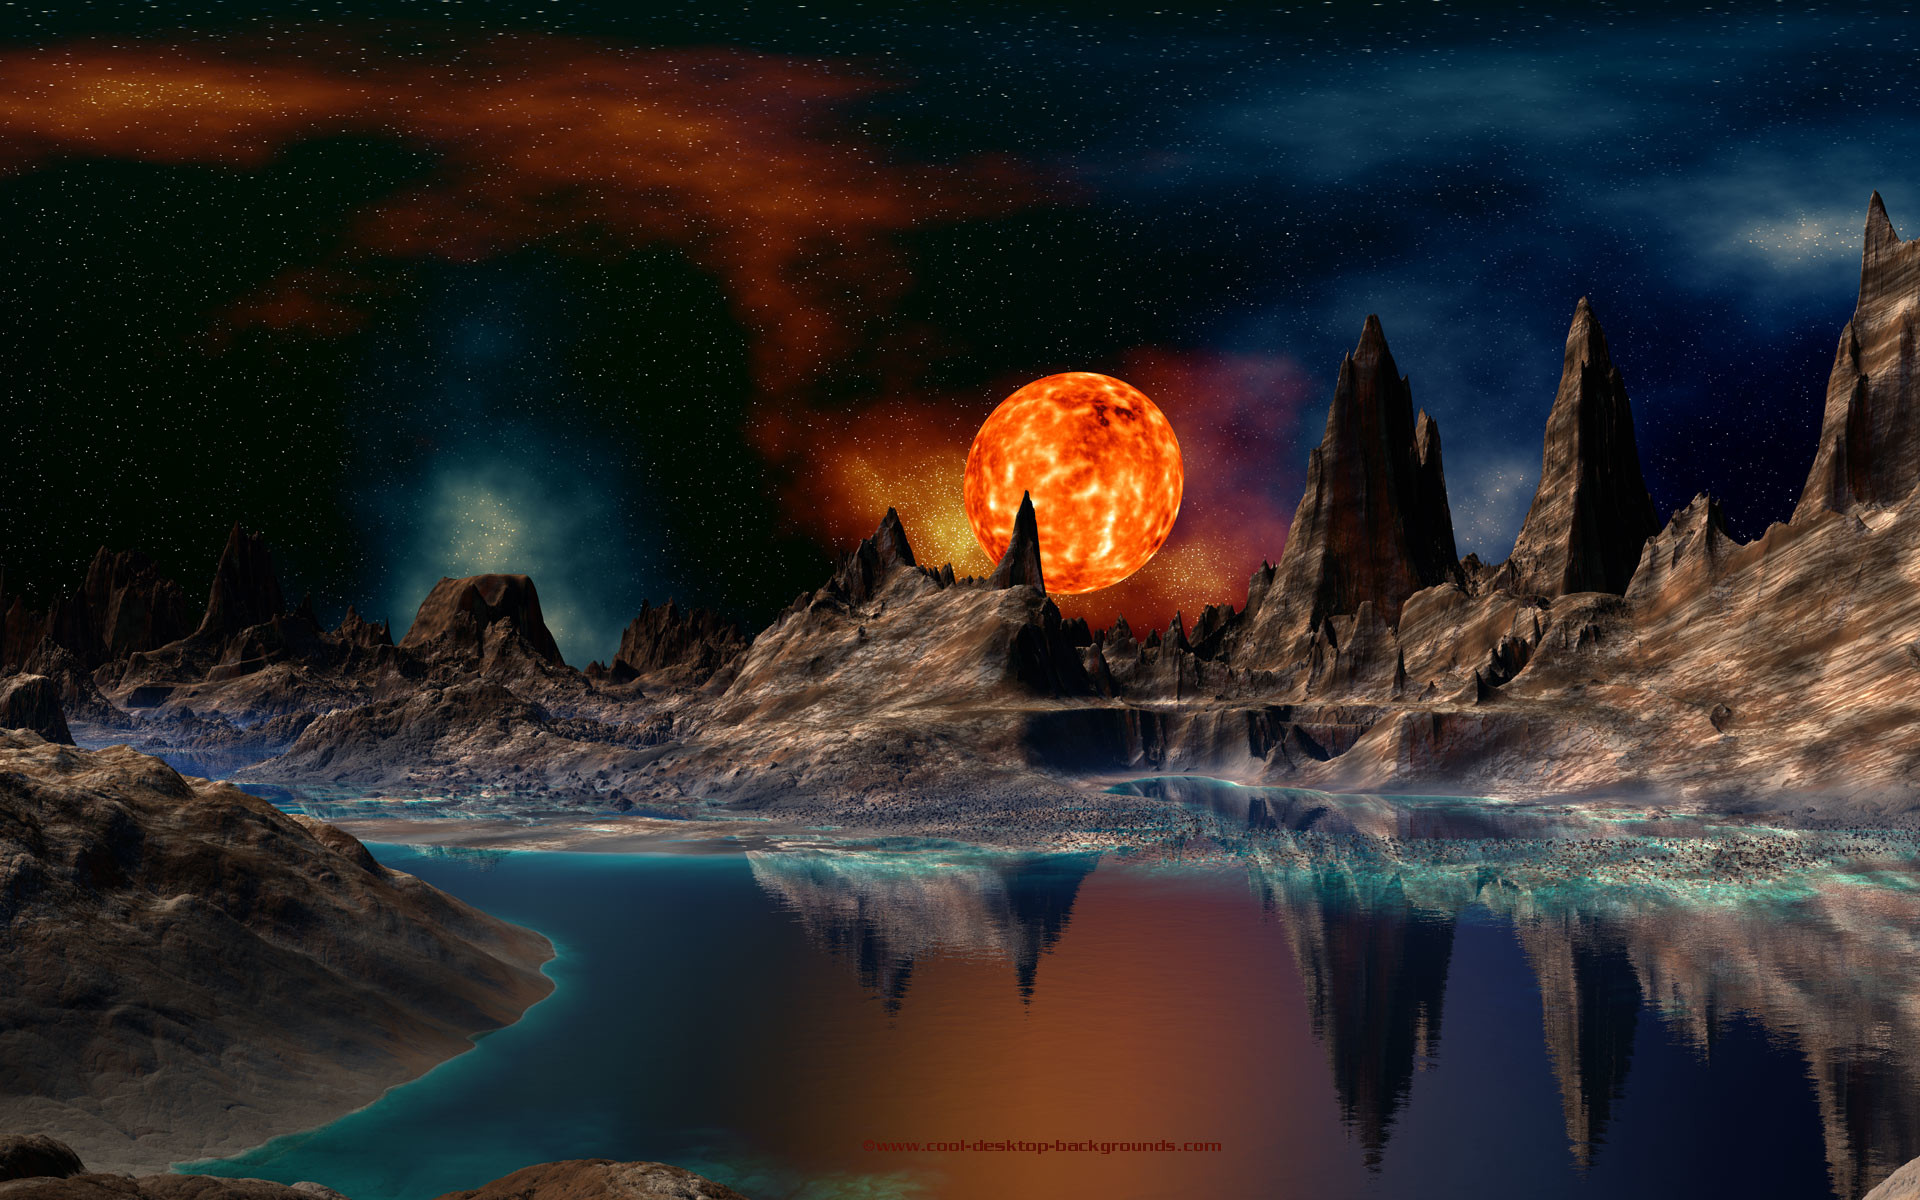 Space background of a red giant sun setting over a rocky alien planet. Scifi  space background for use as your computer's desktop wallpaper.